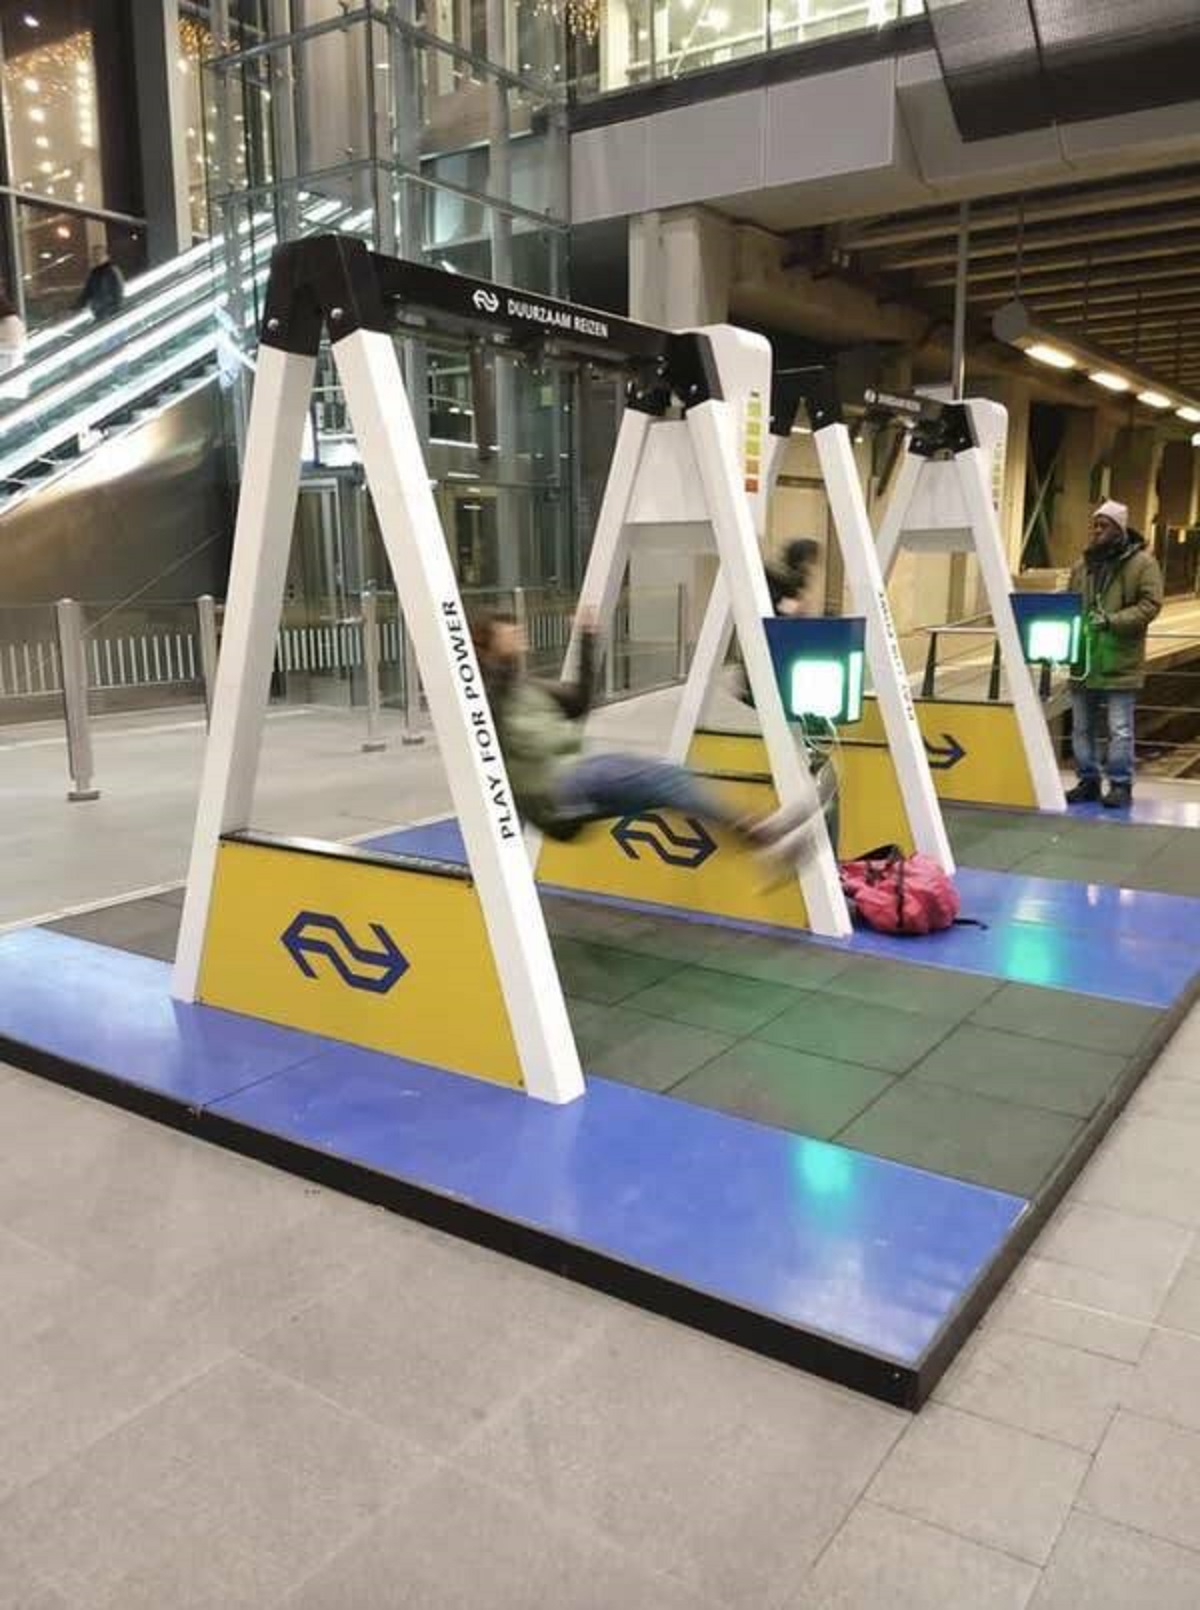 Though swinging to charge your phone, like at this train station in the Netherlands, is even cooler.